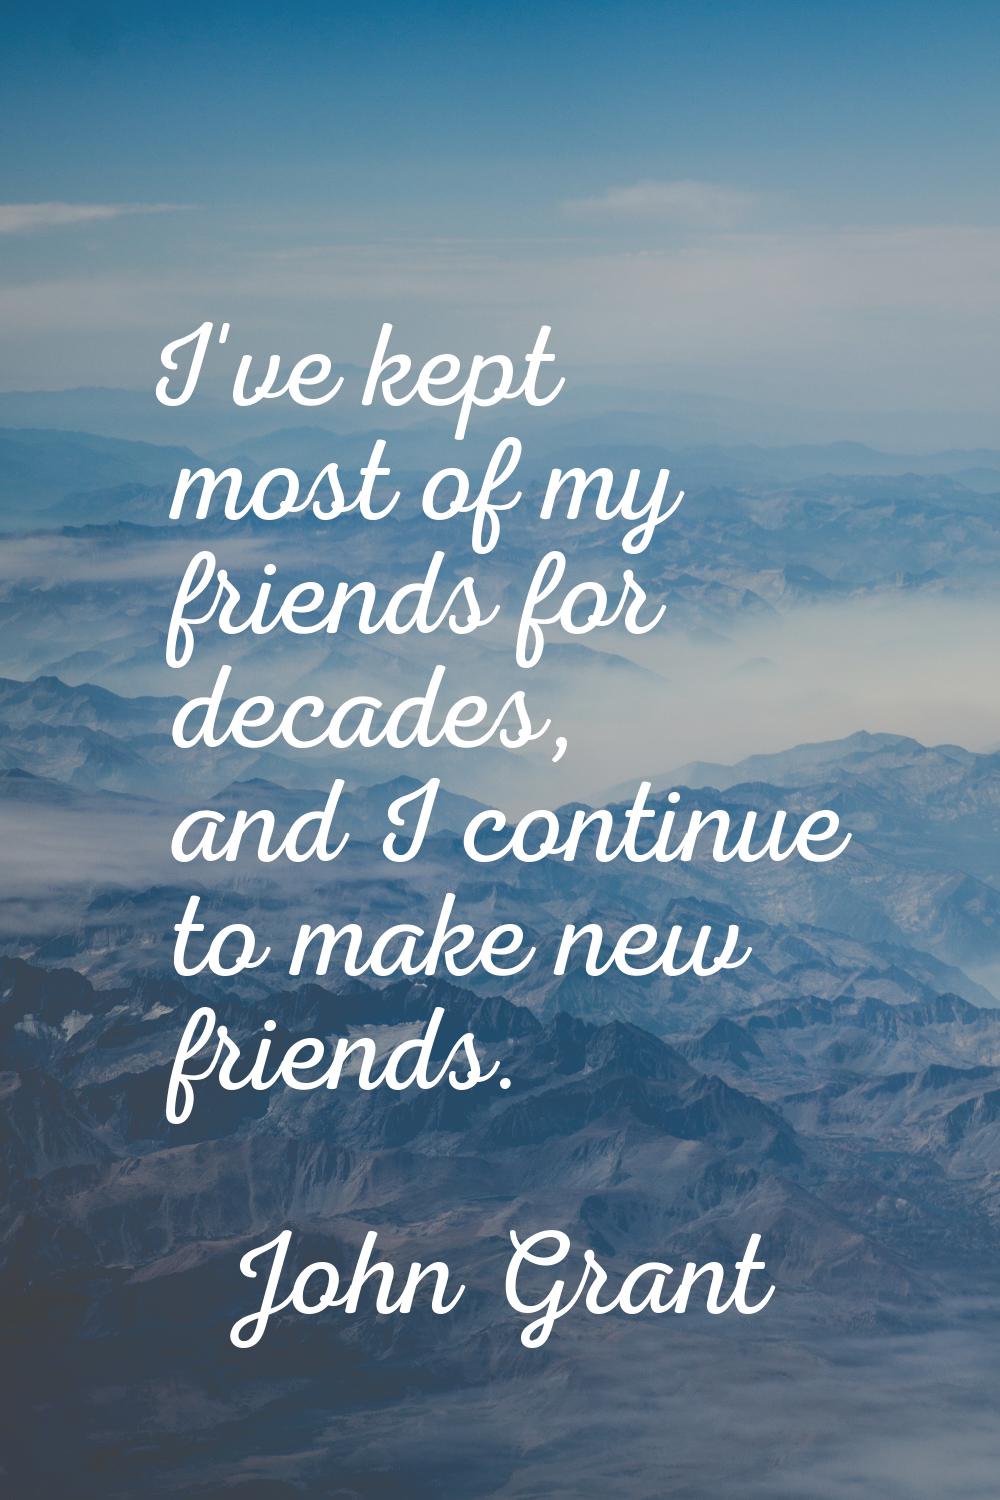 I've kept most of my friends for decades, and I continue to make new friends.